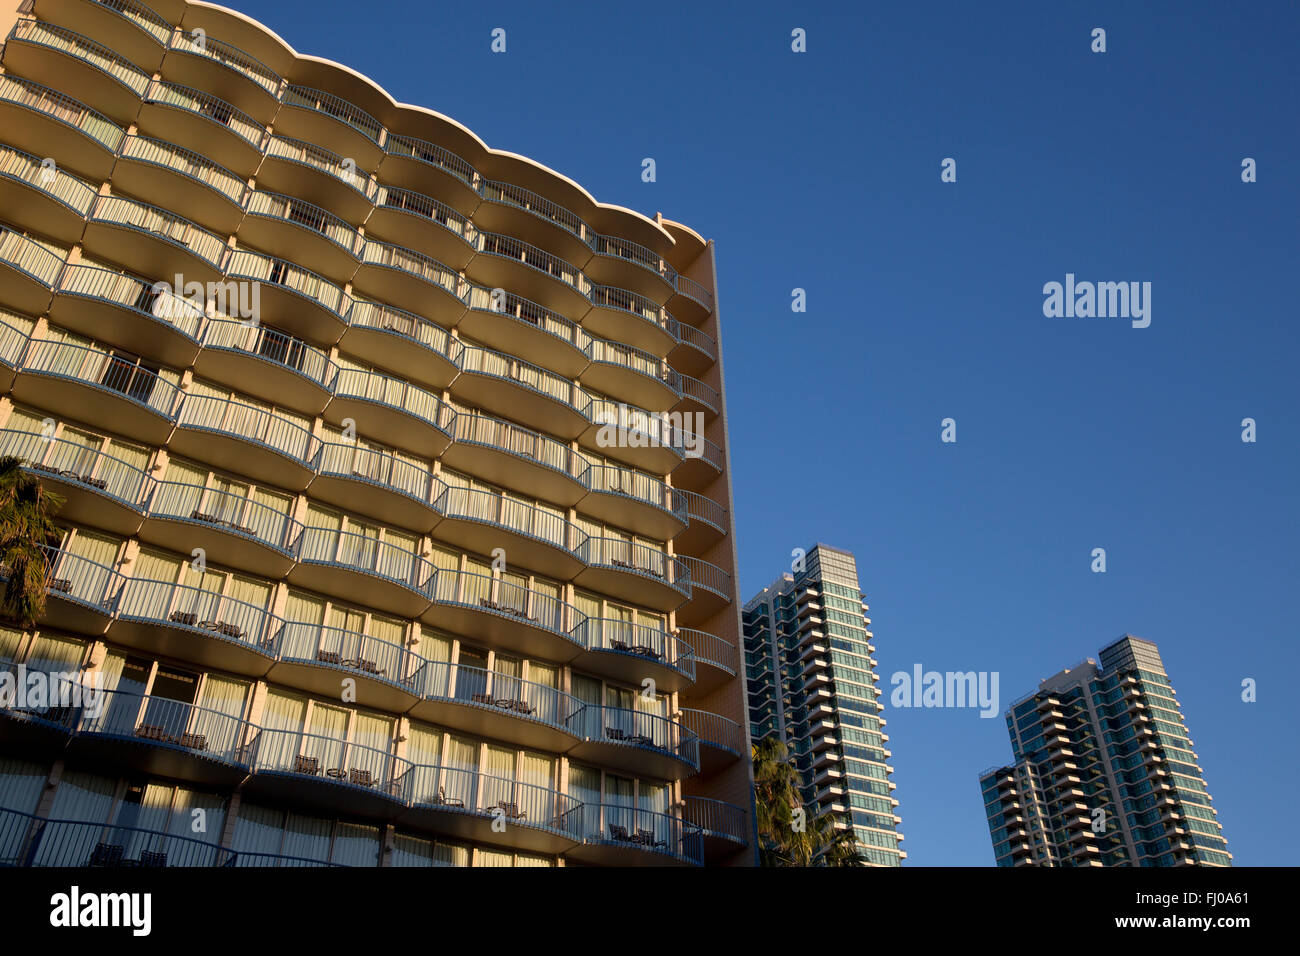 Windham Hotel and apartment buildings San Diego California USA Stock Photo